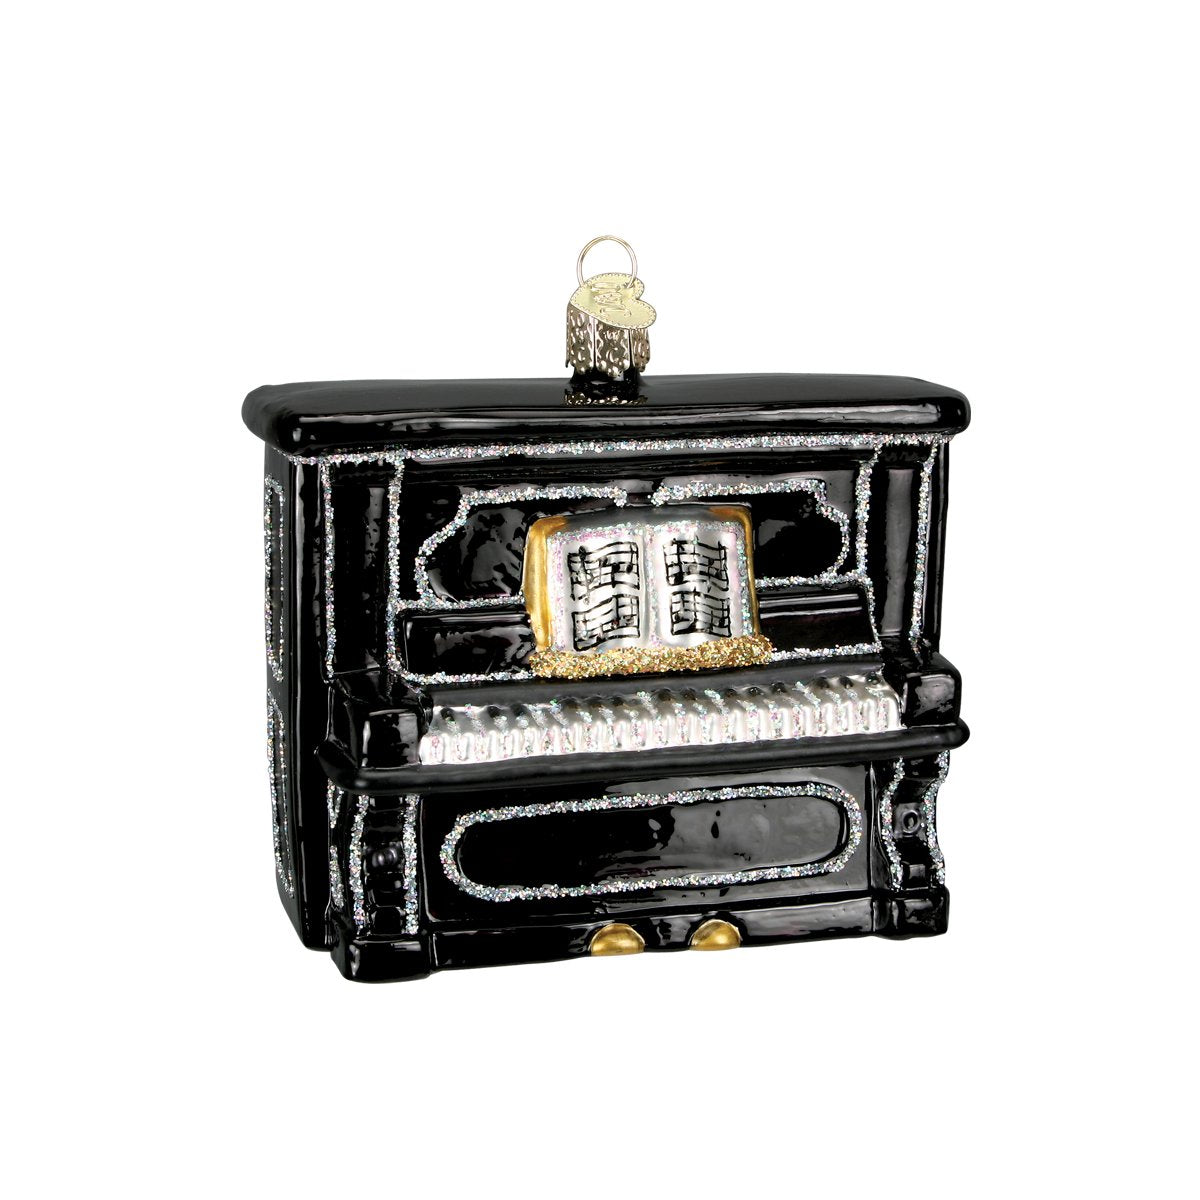 Old World Christmas - Black Upright Piano Ornament    